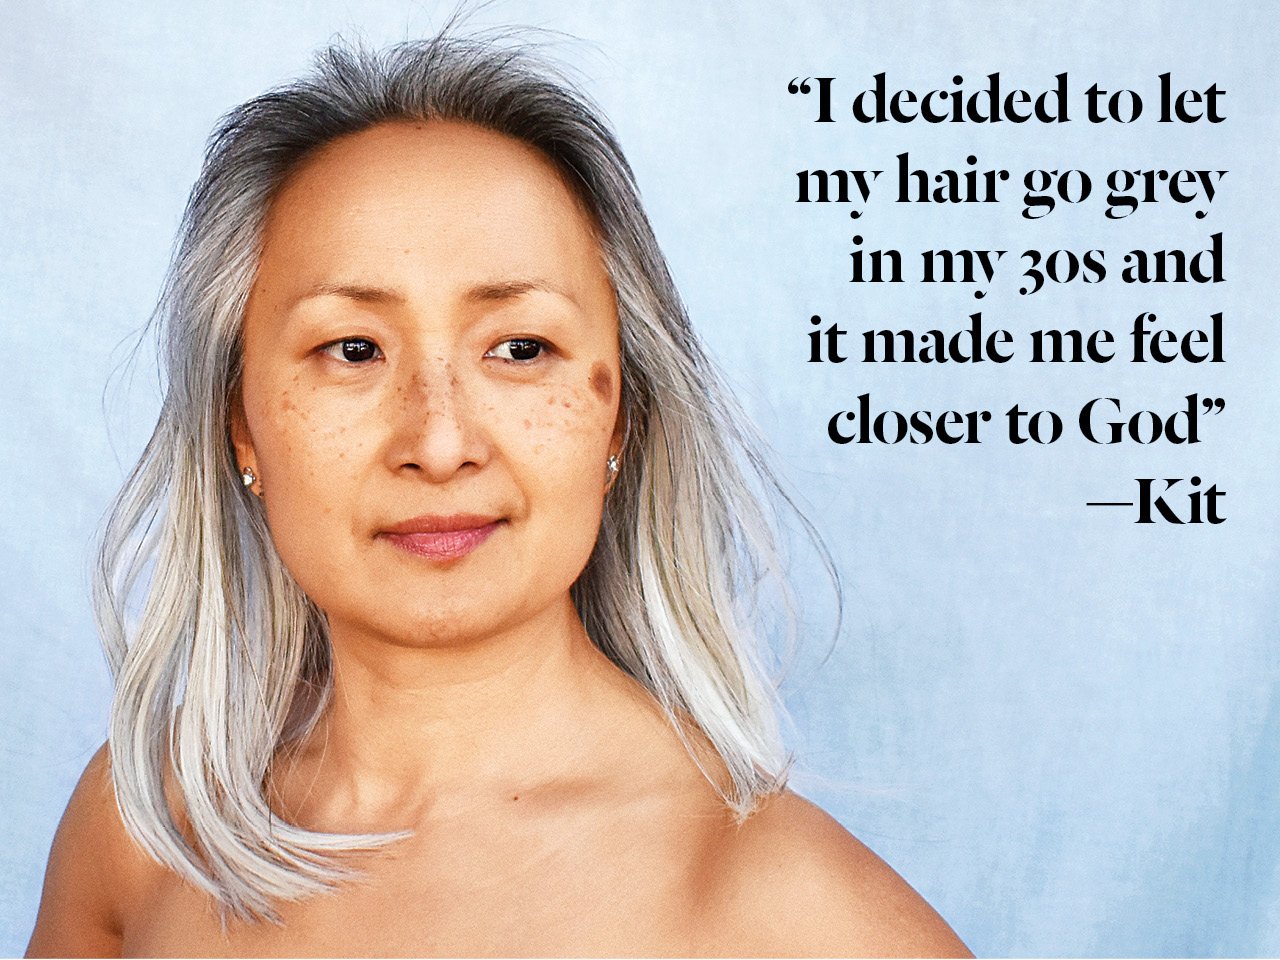 Premature Grey Hair: Why I Decided to Go Grey In My Thirties | Chatelaine